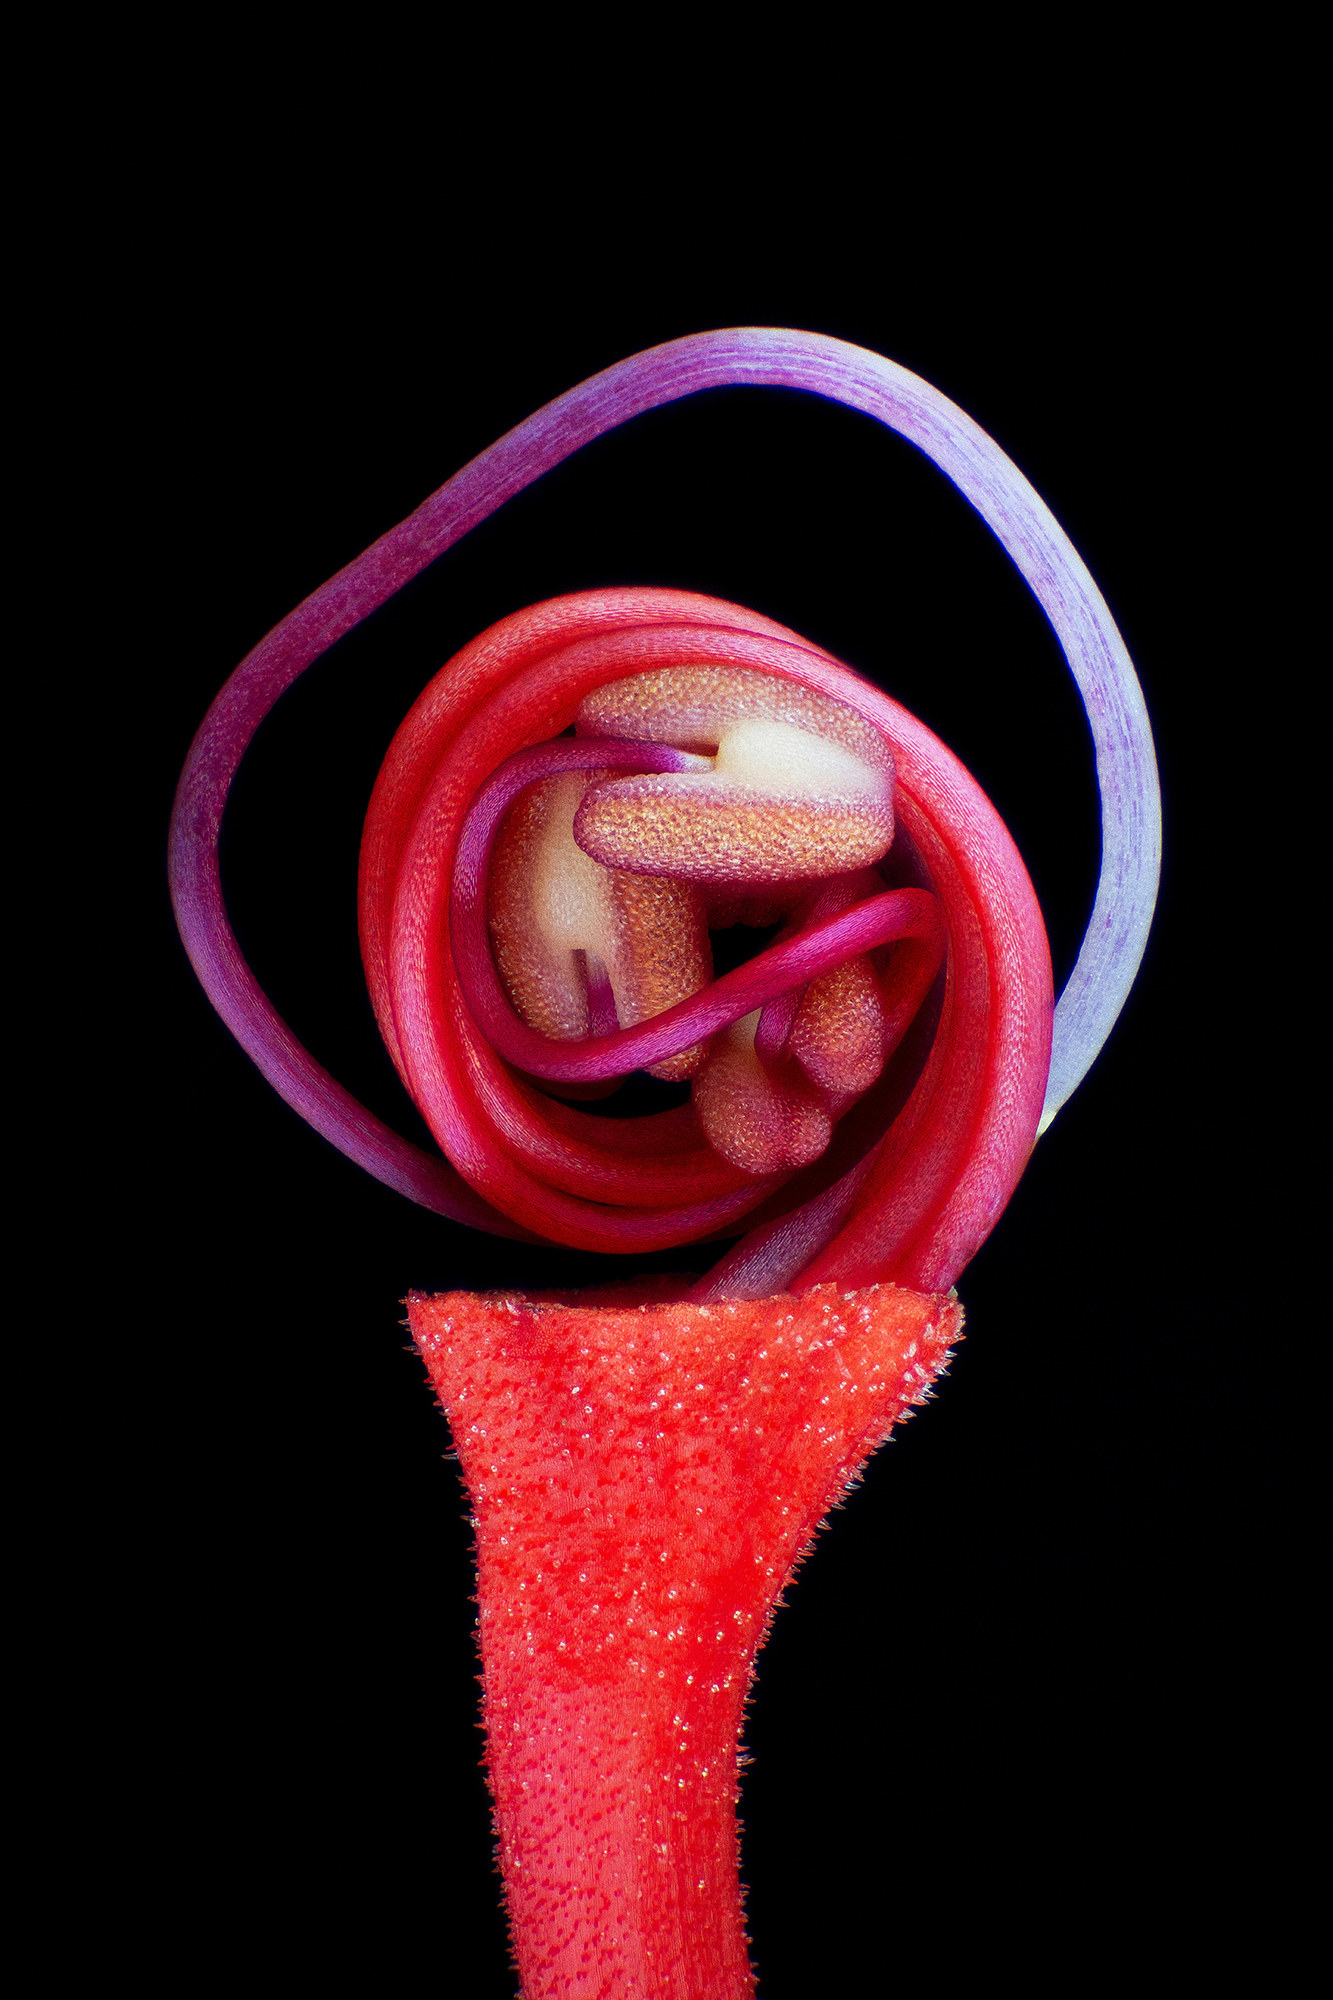 A pink swirl on top of a pink stem section of a flower on back background,  magnified many times